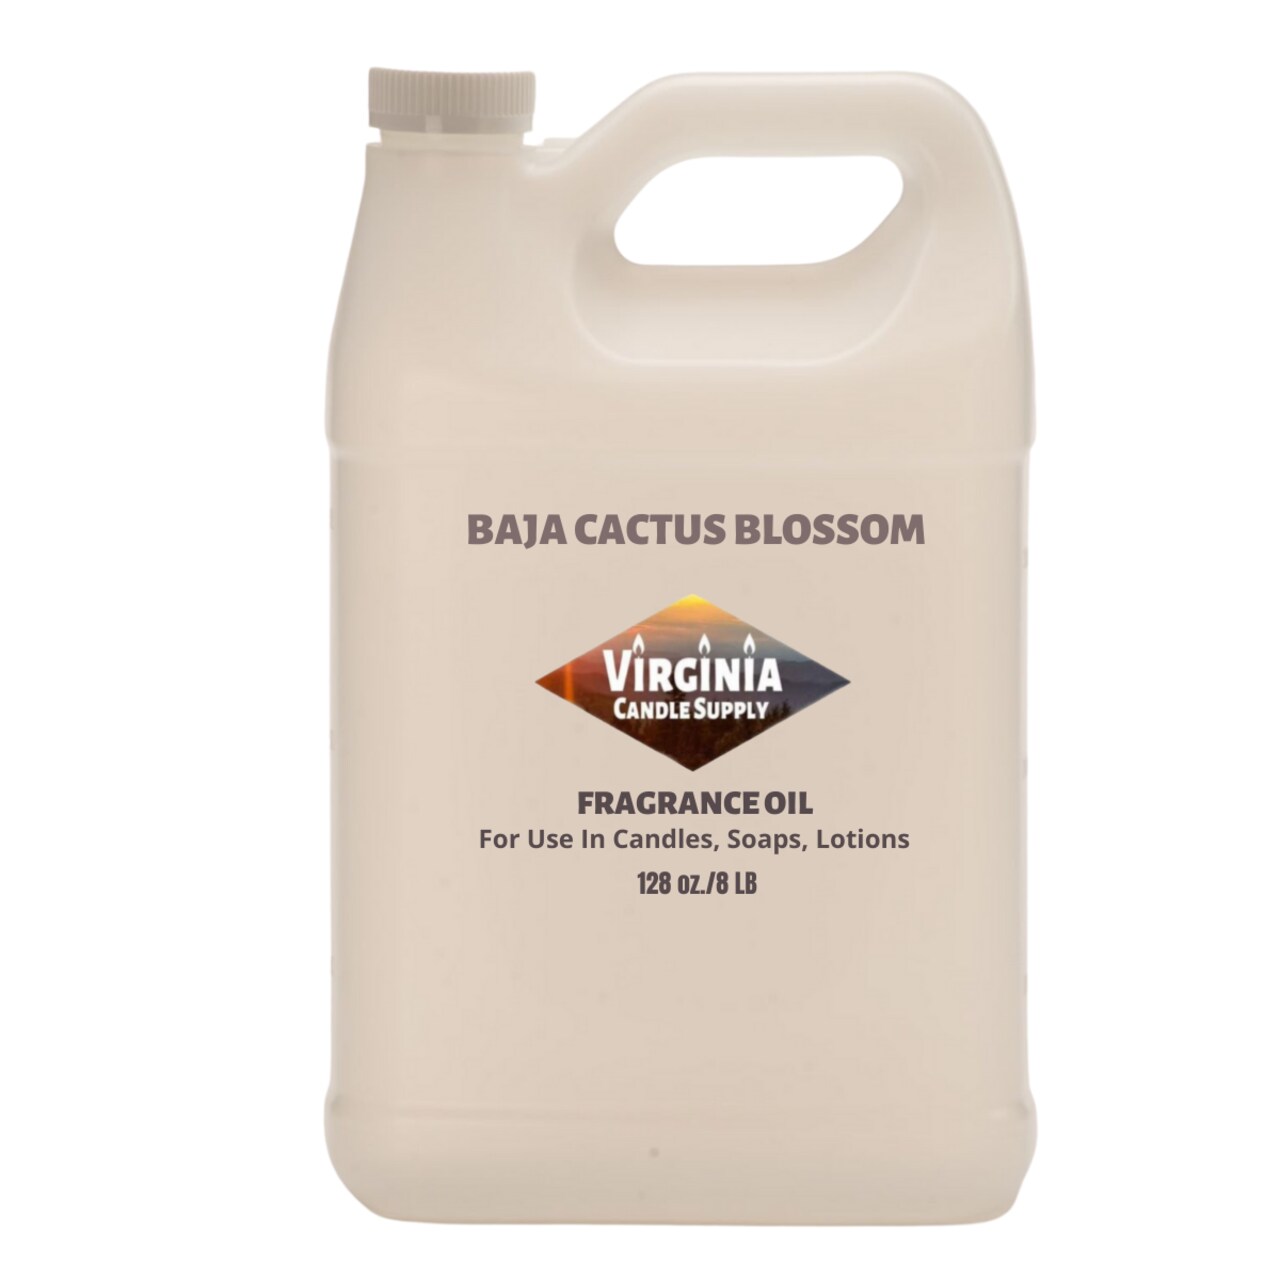 Baja Cactus Blossom (Our Version of the Brand Name) Fragrance Oil (8 LB Jug) for Candle Making, Soap Making, Tart Making, Room Sprays, Lotions, Car Fresheners, Slime, Bath Bombs, Warmers&#x2026;